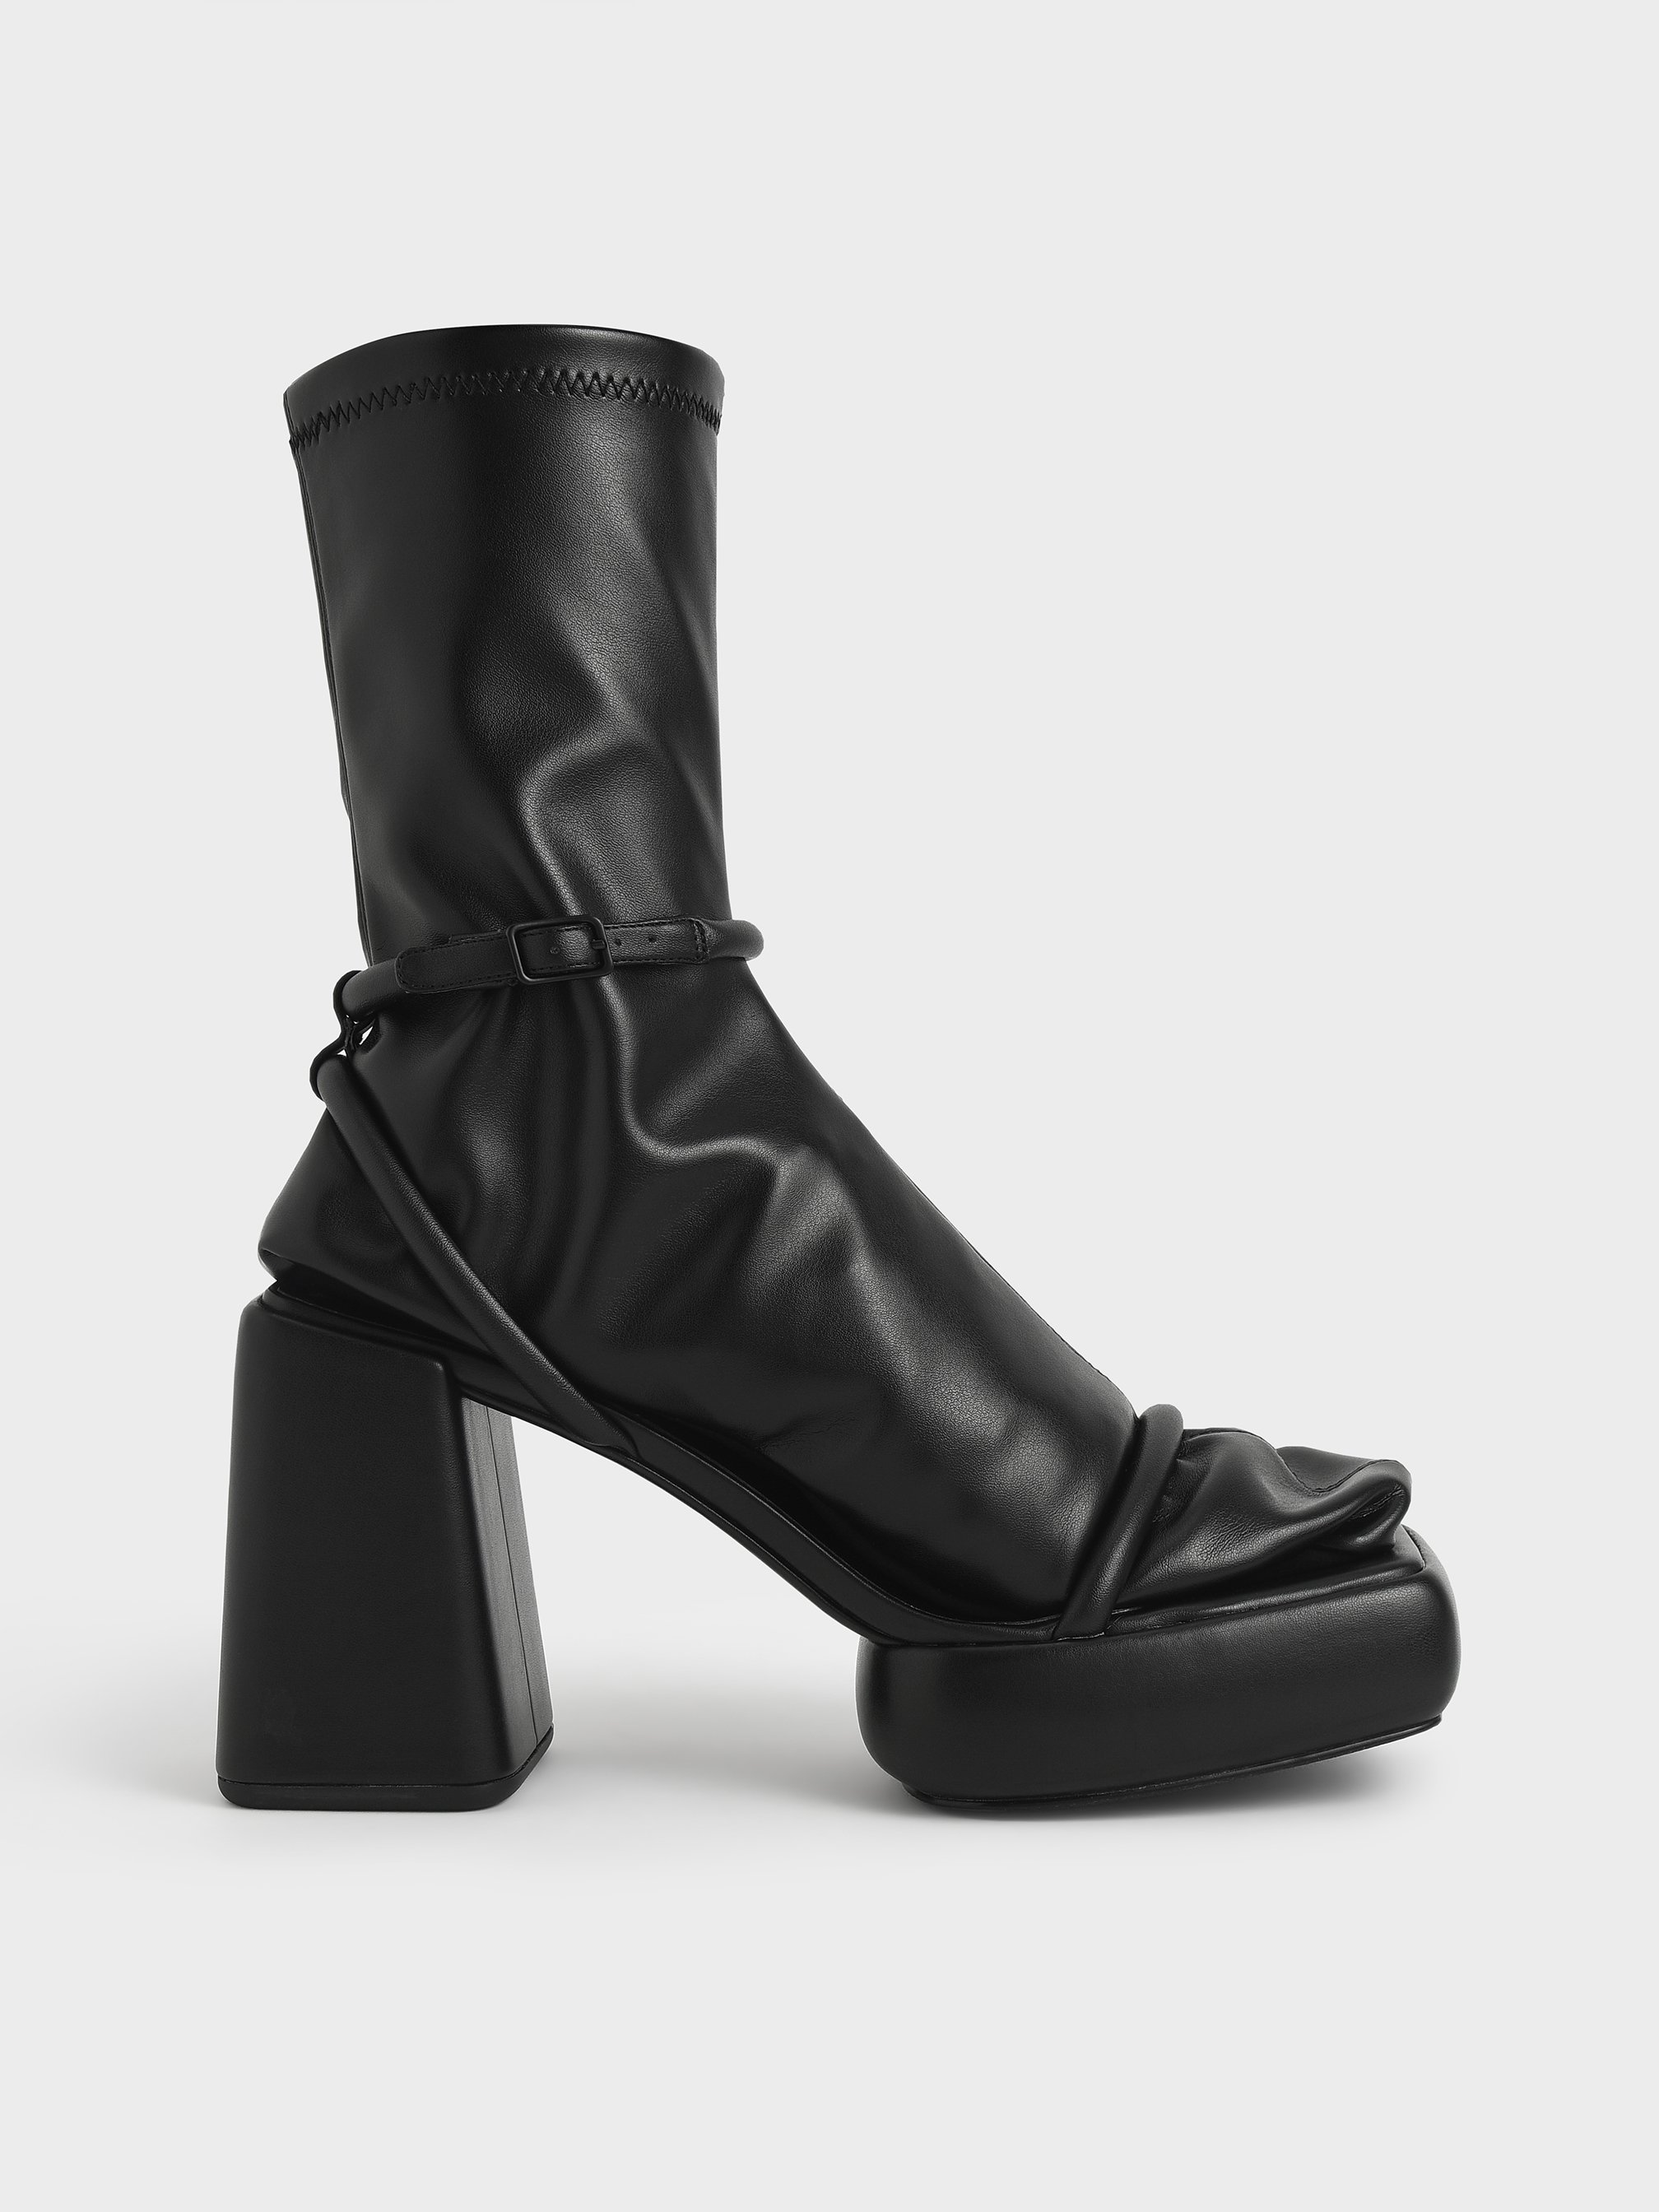 chanel boots cost